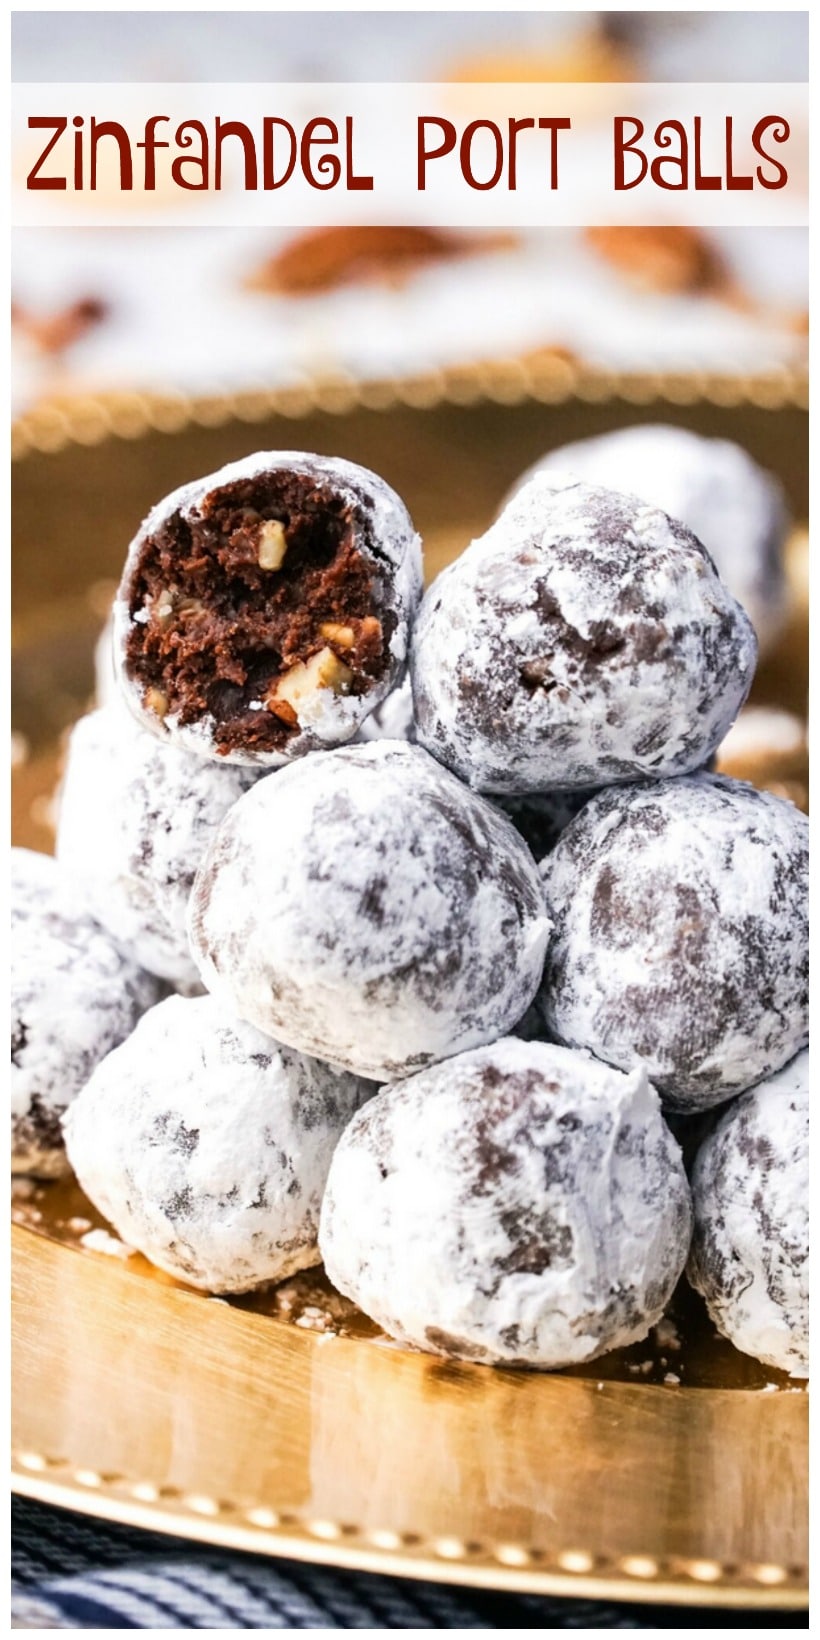 Sophisticated and elegant, these Zinfandel Port Balls are a festive dessert for any occasion. The port and cocoa meld together, erupting into a smooth and warming flavor, sans any raw alcohol taste. Perfect for gifting too. #noblepig #port #portwine #zinfandel #zinfandeldessert #dessert #dessertballs #cocoa #homemadegifting #homemadegift #ediblegift #winedessert #dessertwine #holidaygift #valentinesdessert #newyearseve #christmasdessert via @cmpollak1